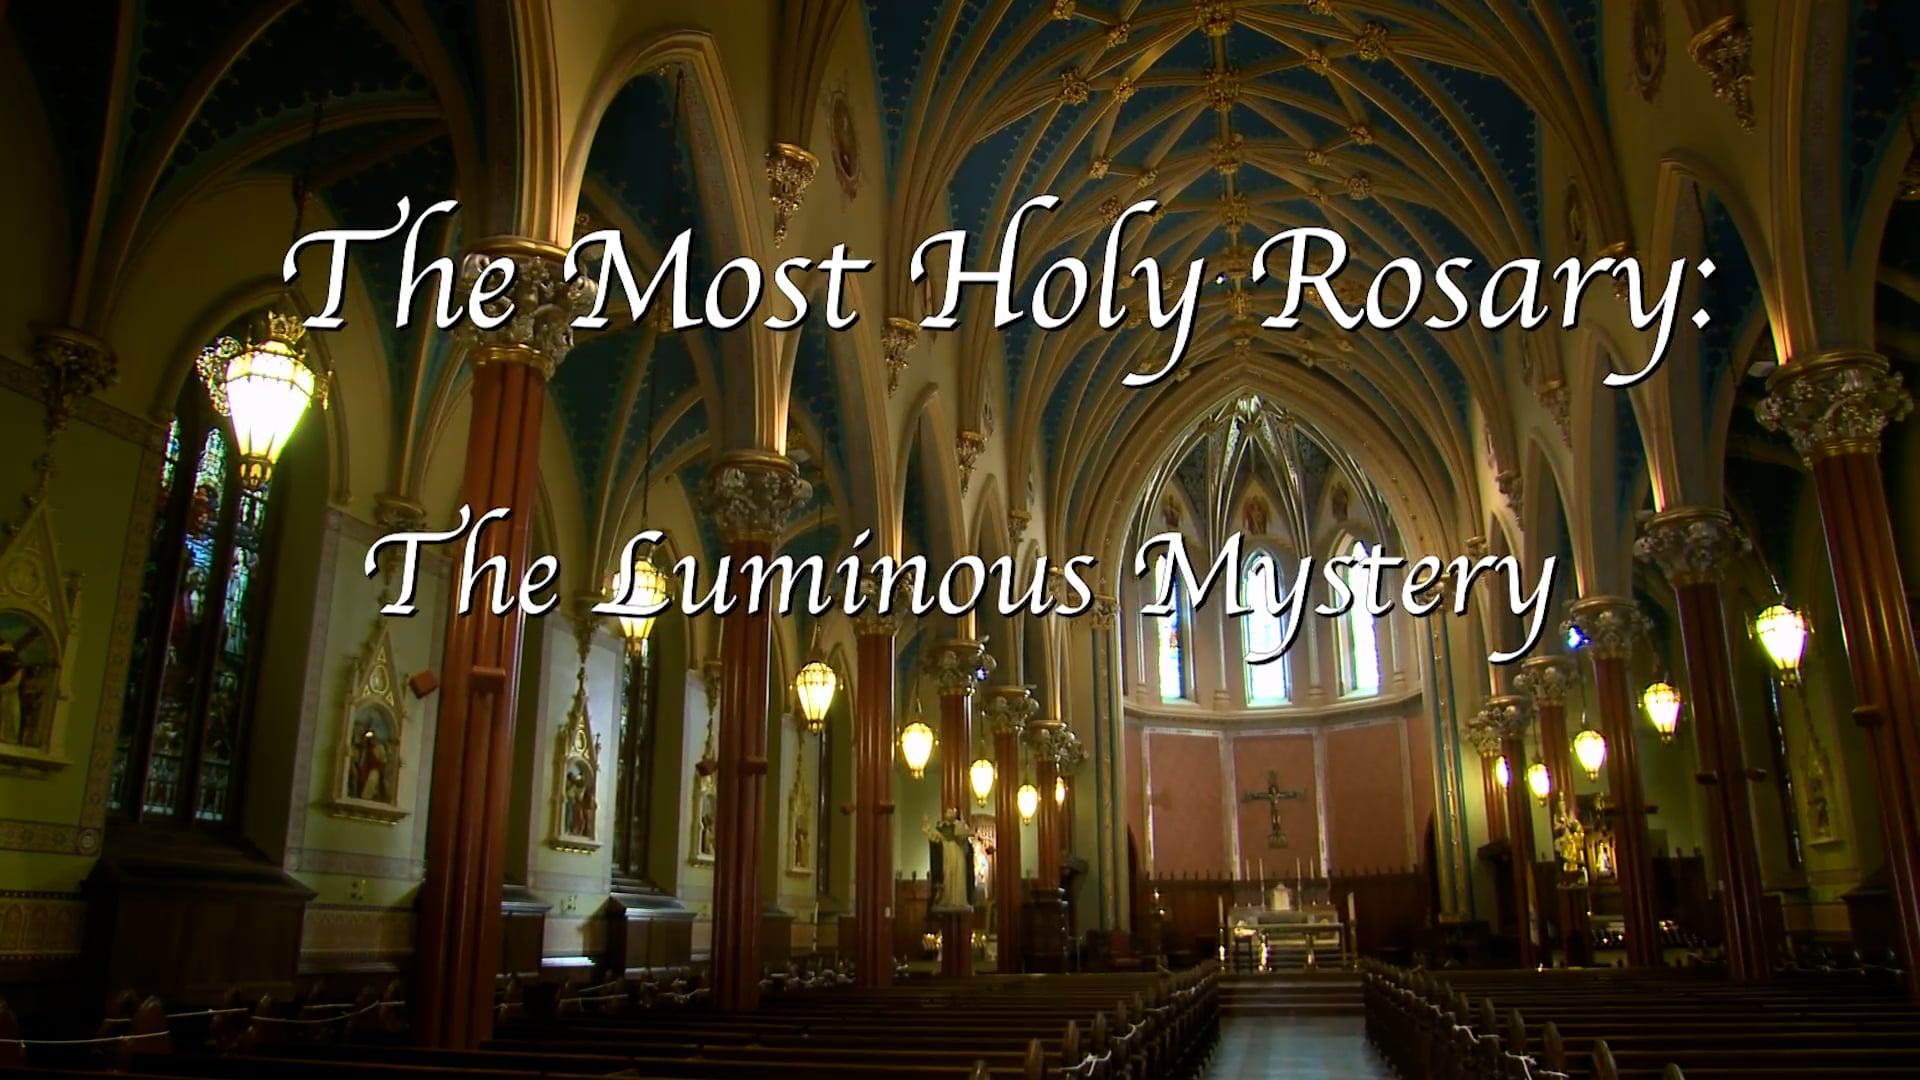 The Rosary: The Luminous Mysteries led by Bishop John Barres